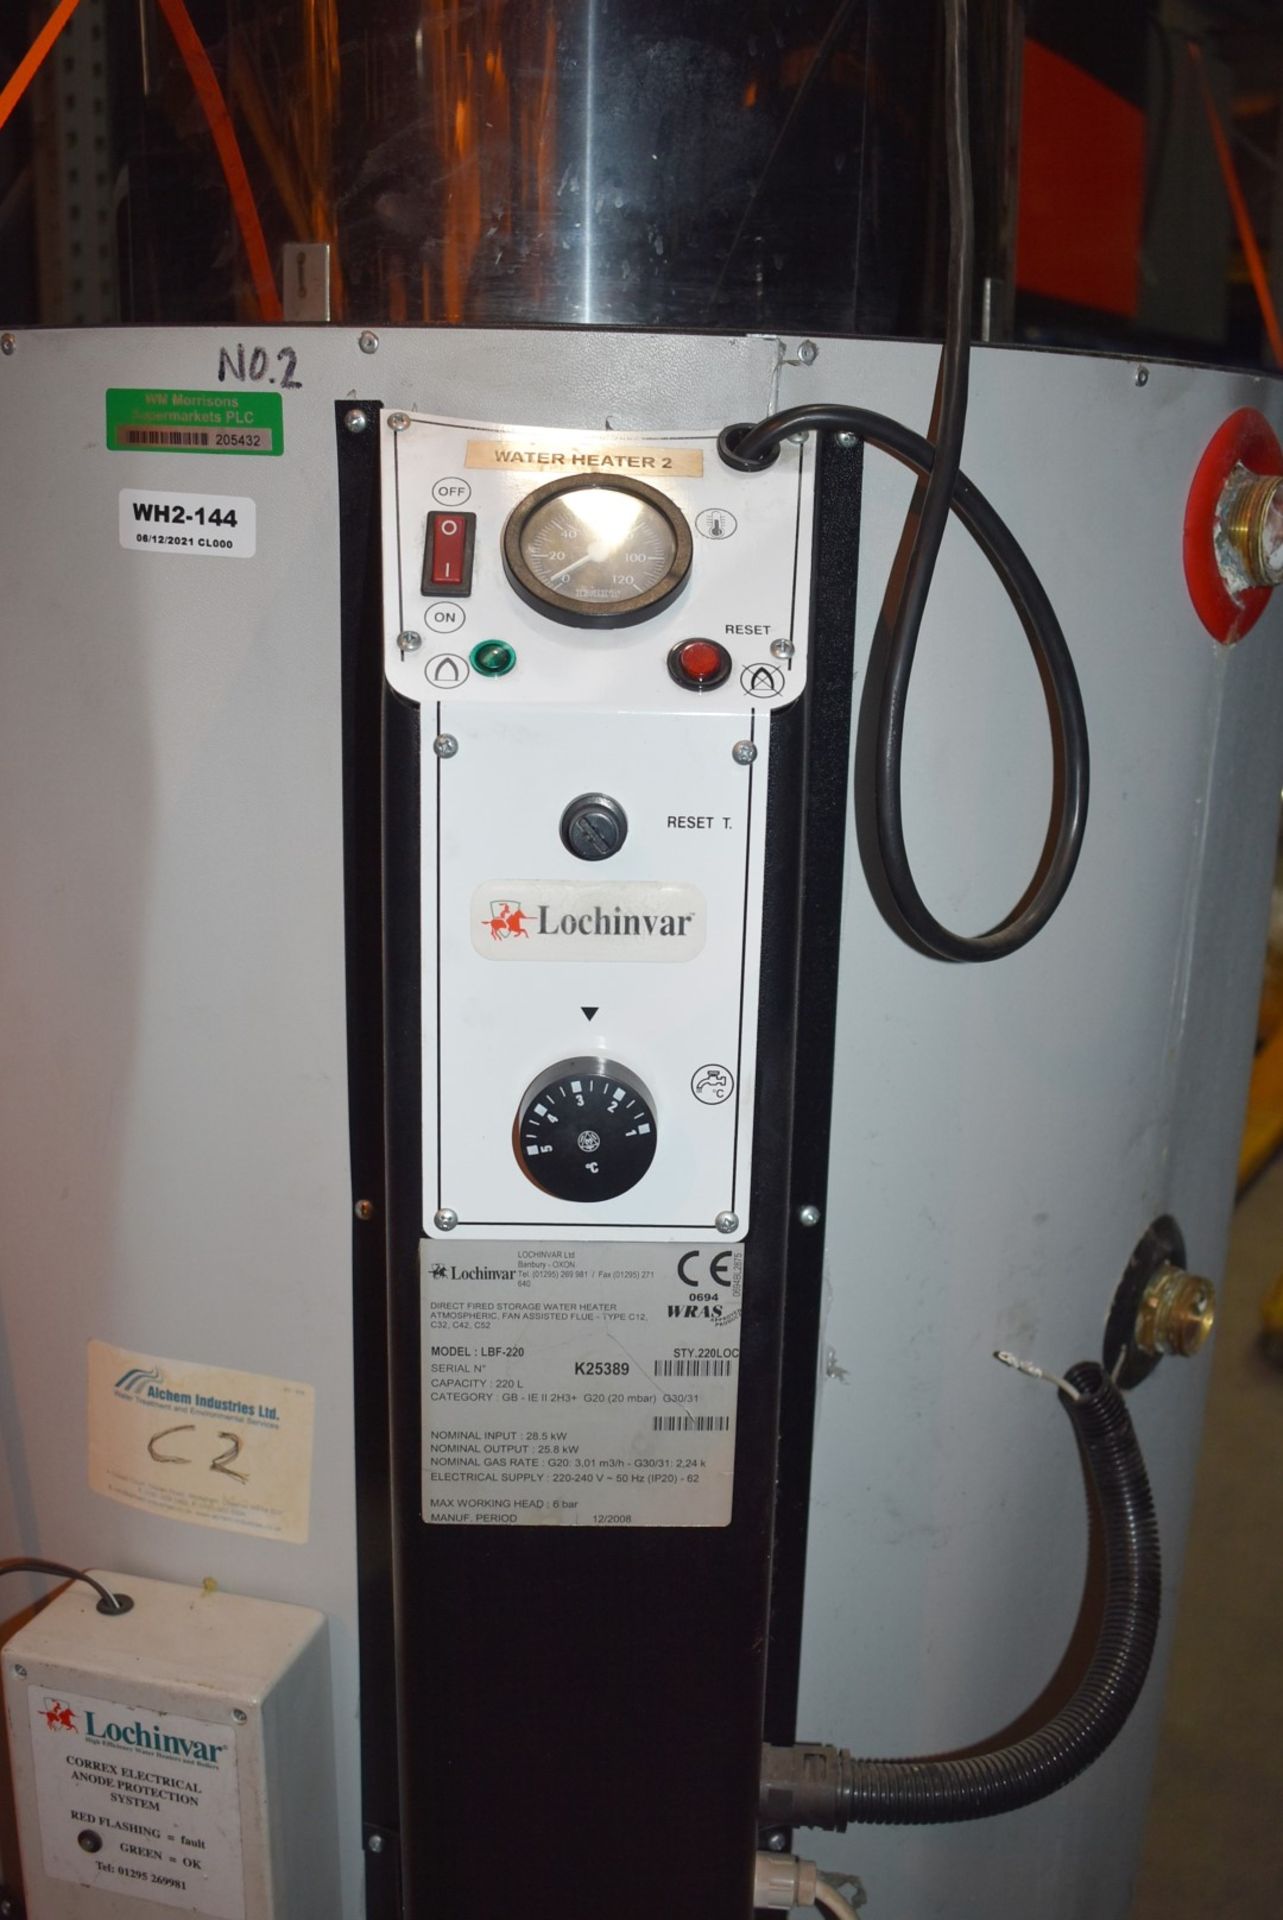 1 x Lochinvar High Efficiency Gas Fired 220L Storage Water Heater - Model LBF-220 - Ref: WH2-144 H5D - Image 5 of 19